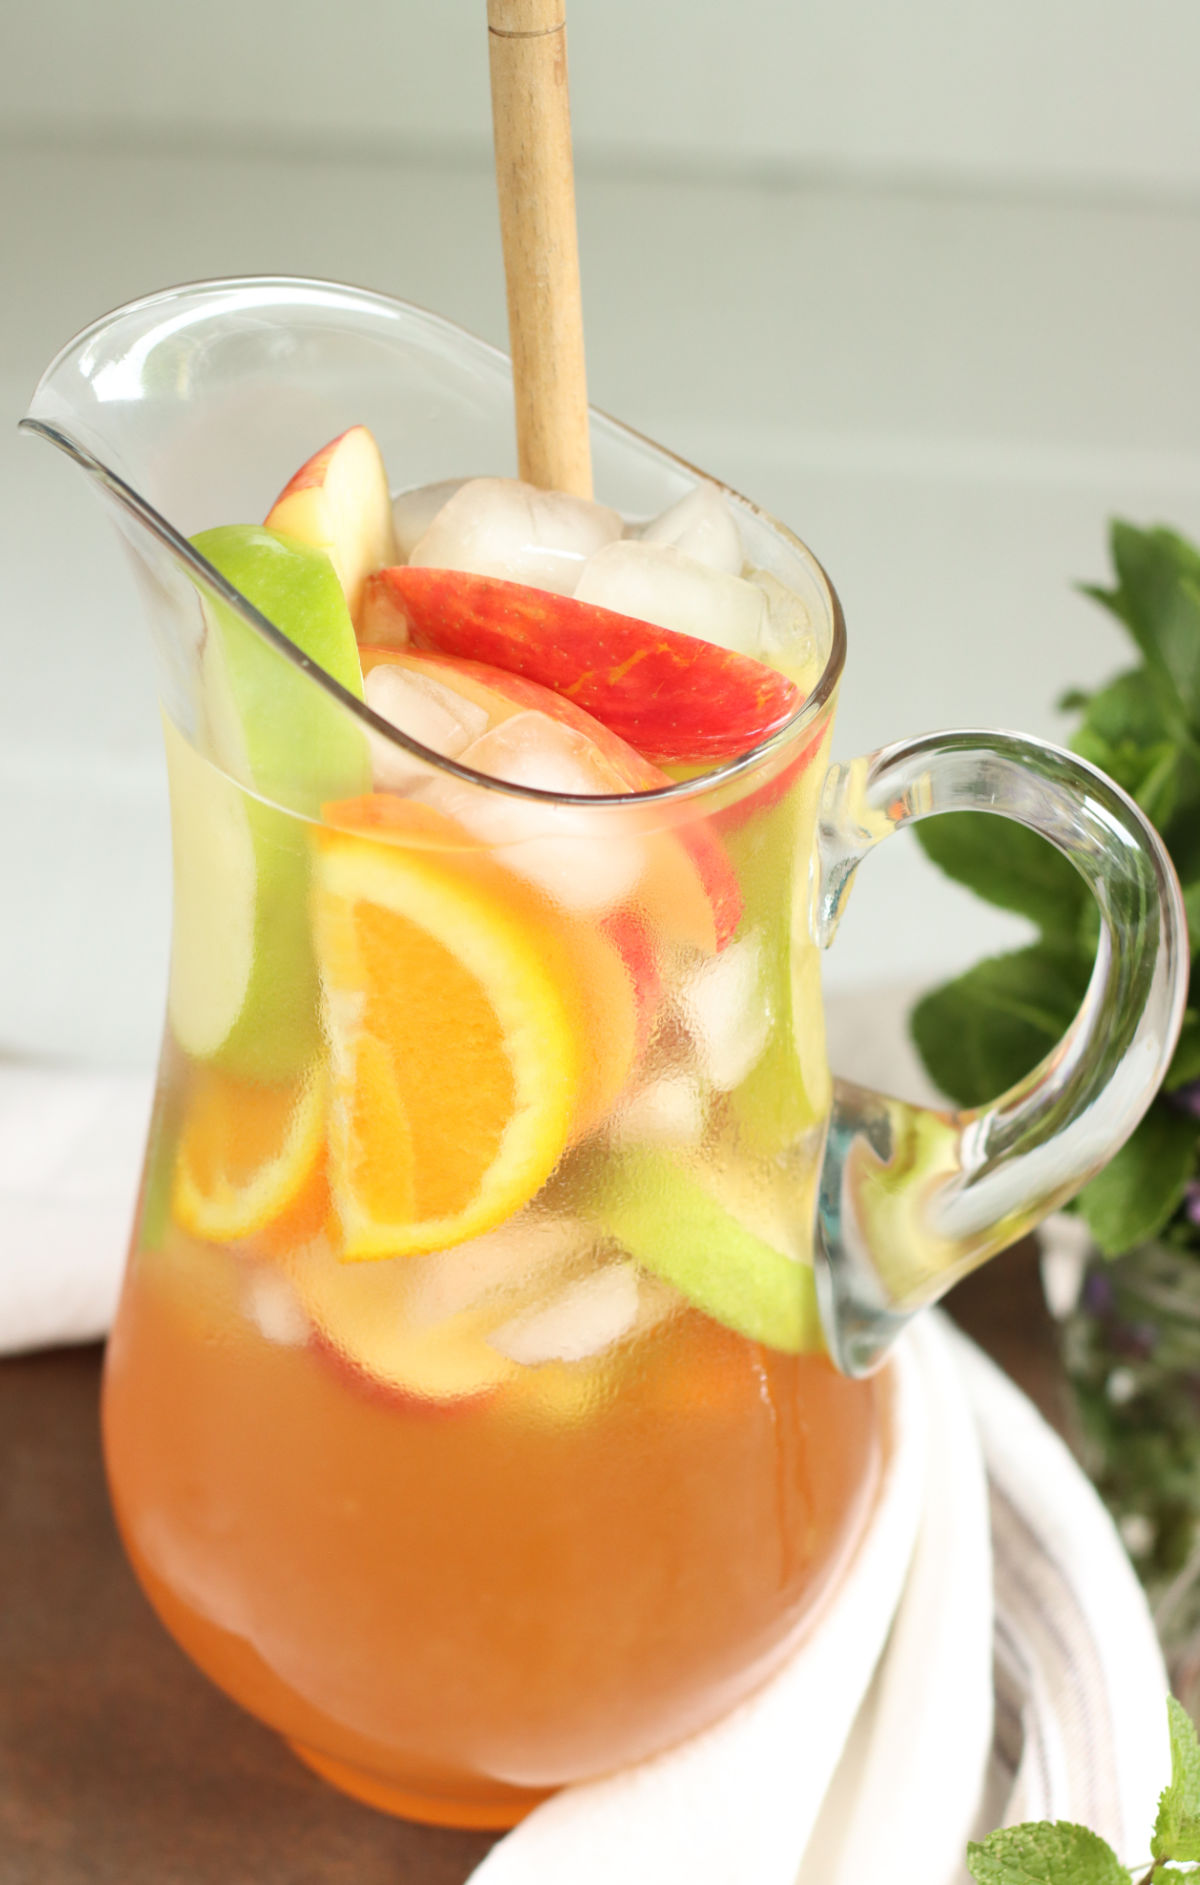 Glass pouring pitcher with white sangria, red and green apples, orange slices.